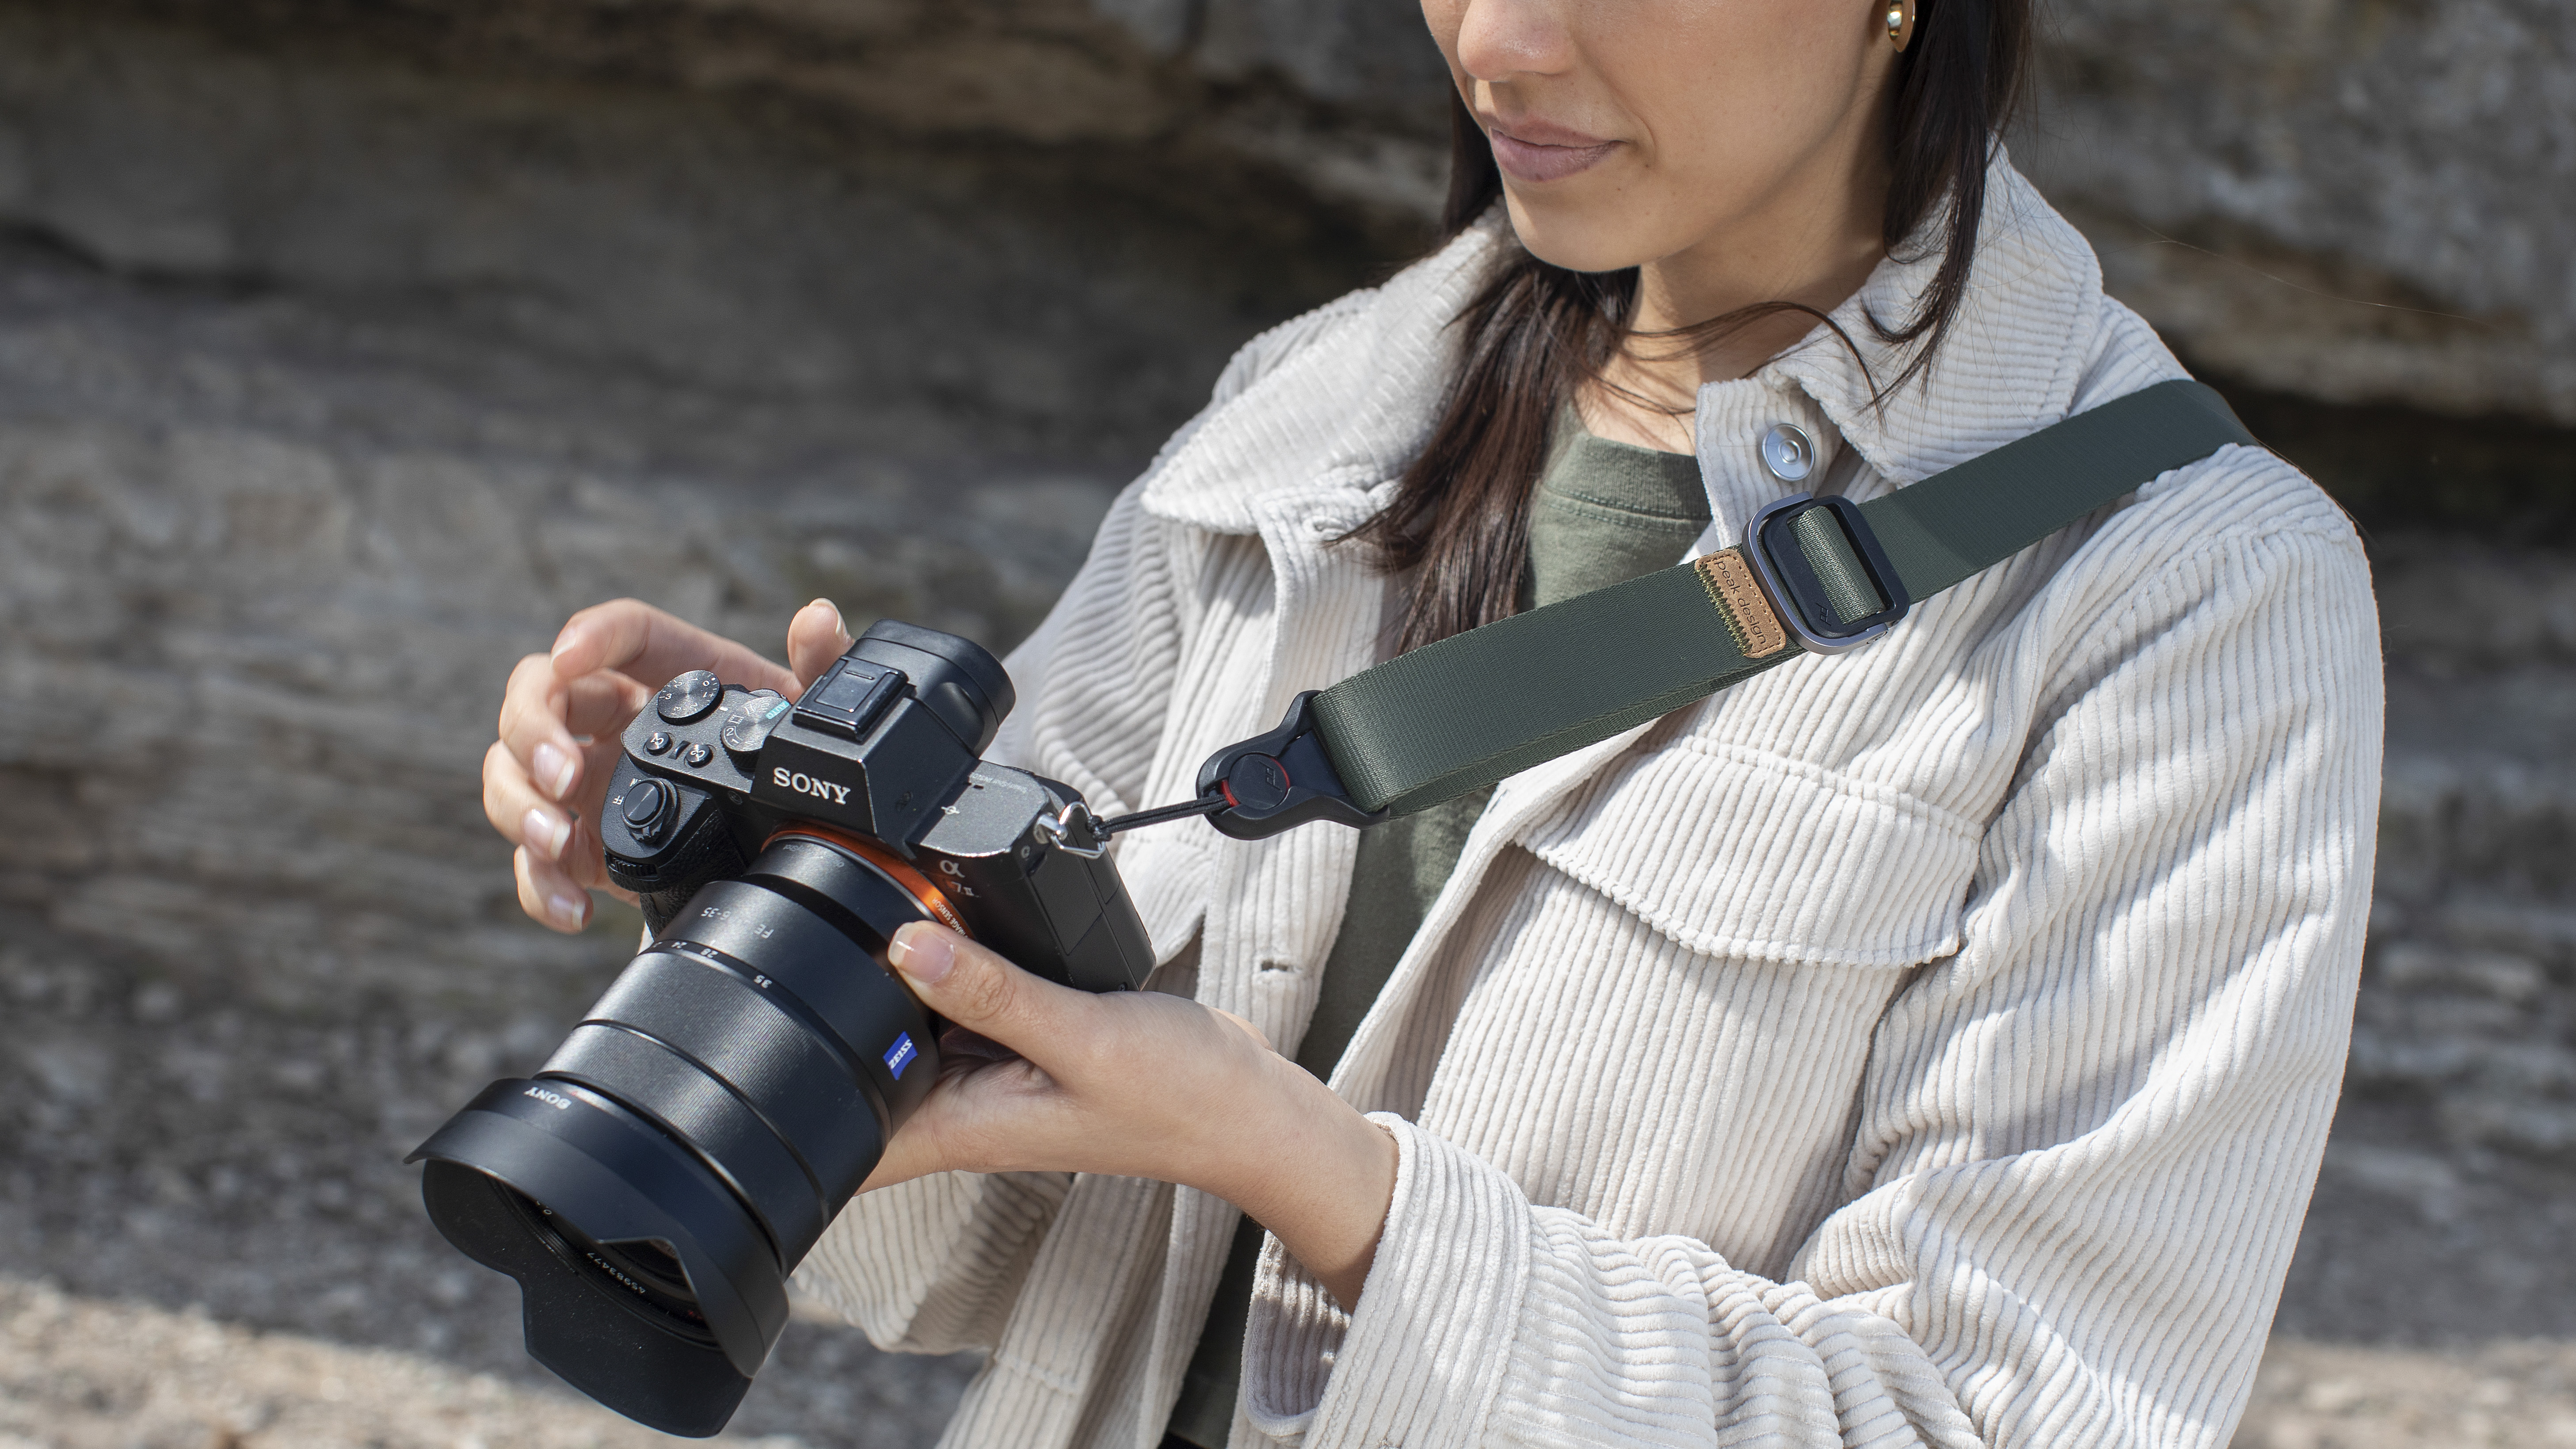 Camera Wrist Strap｜Higher-end and Safer Adjustable Camera Wrist Lanyard Beige Suitable for Nikon/Canon/Sony/Panasonic/Fujifilm/Olympus DSLR or Mirrorless Camera Hand Strap 